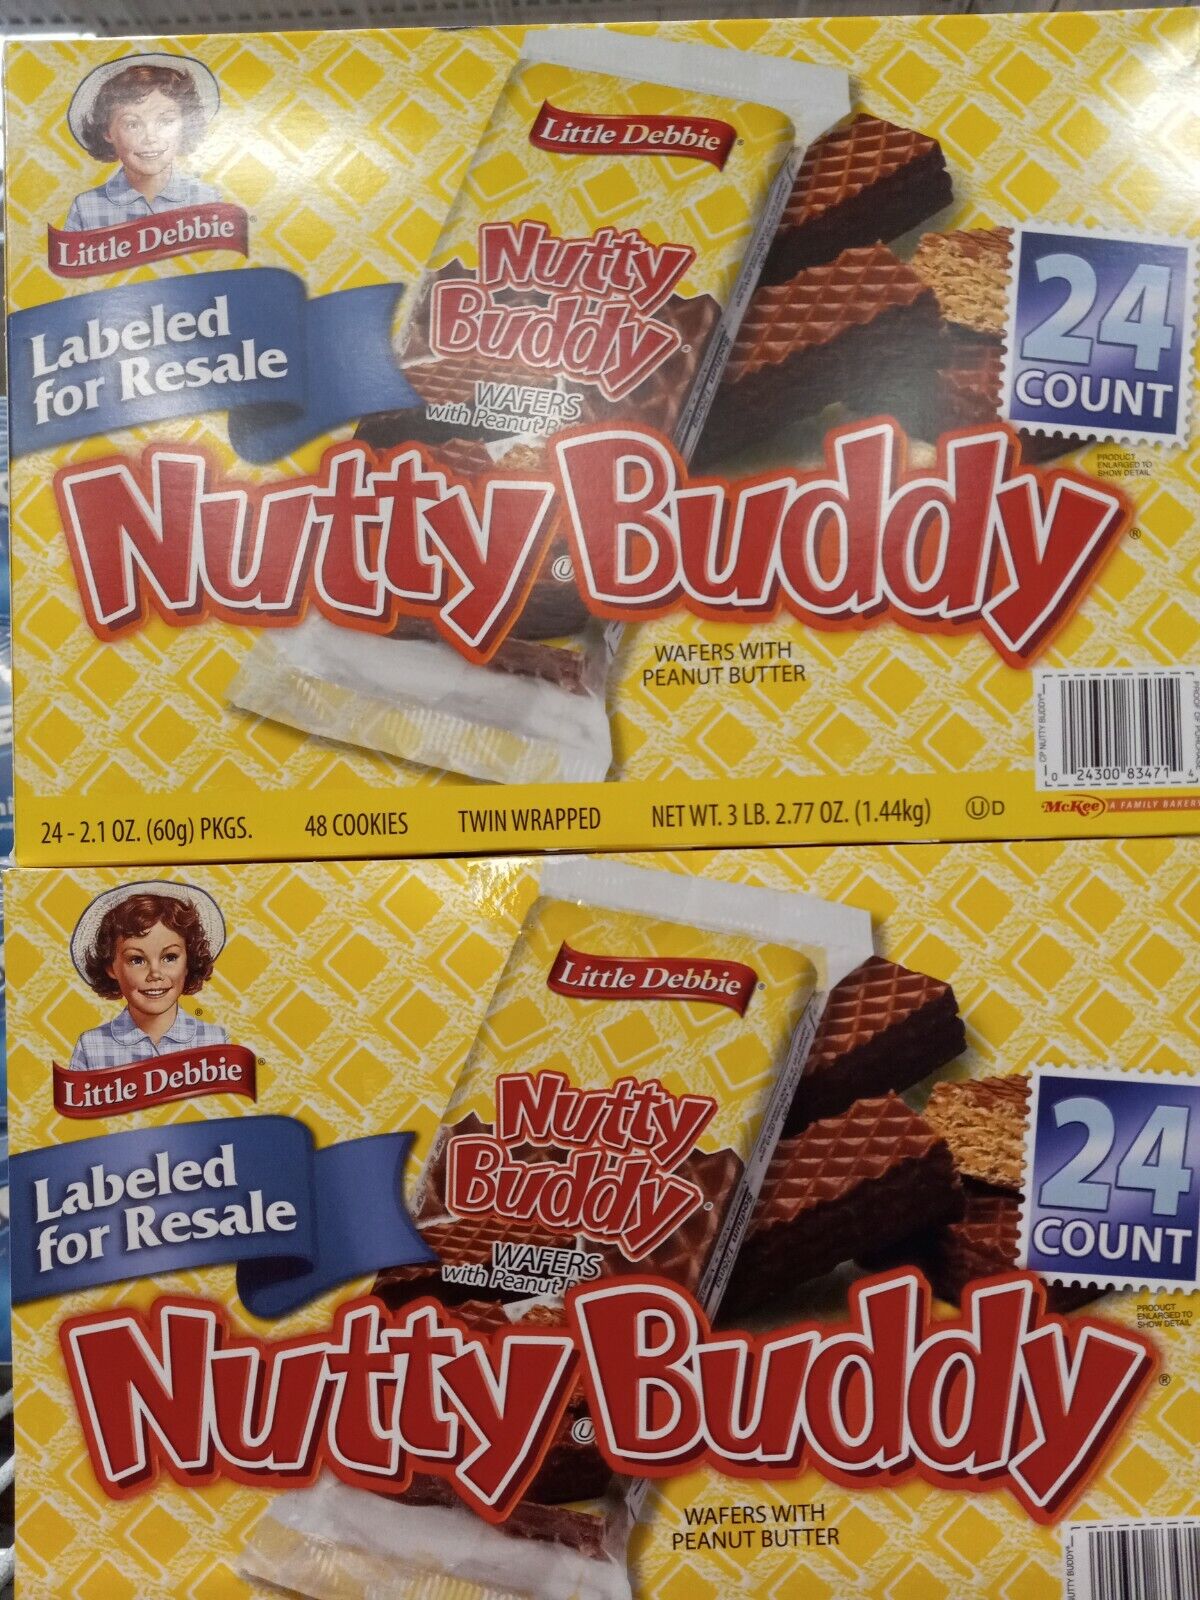 X 2 Boxes!!. Little Debbie Nutty Buddy Wafer Chocolate Peanut Butter 24ct  Each